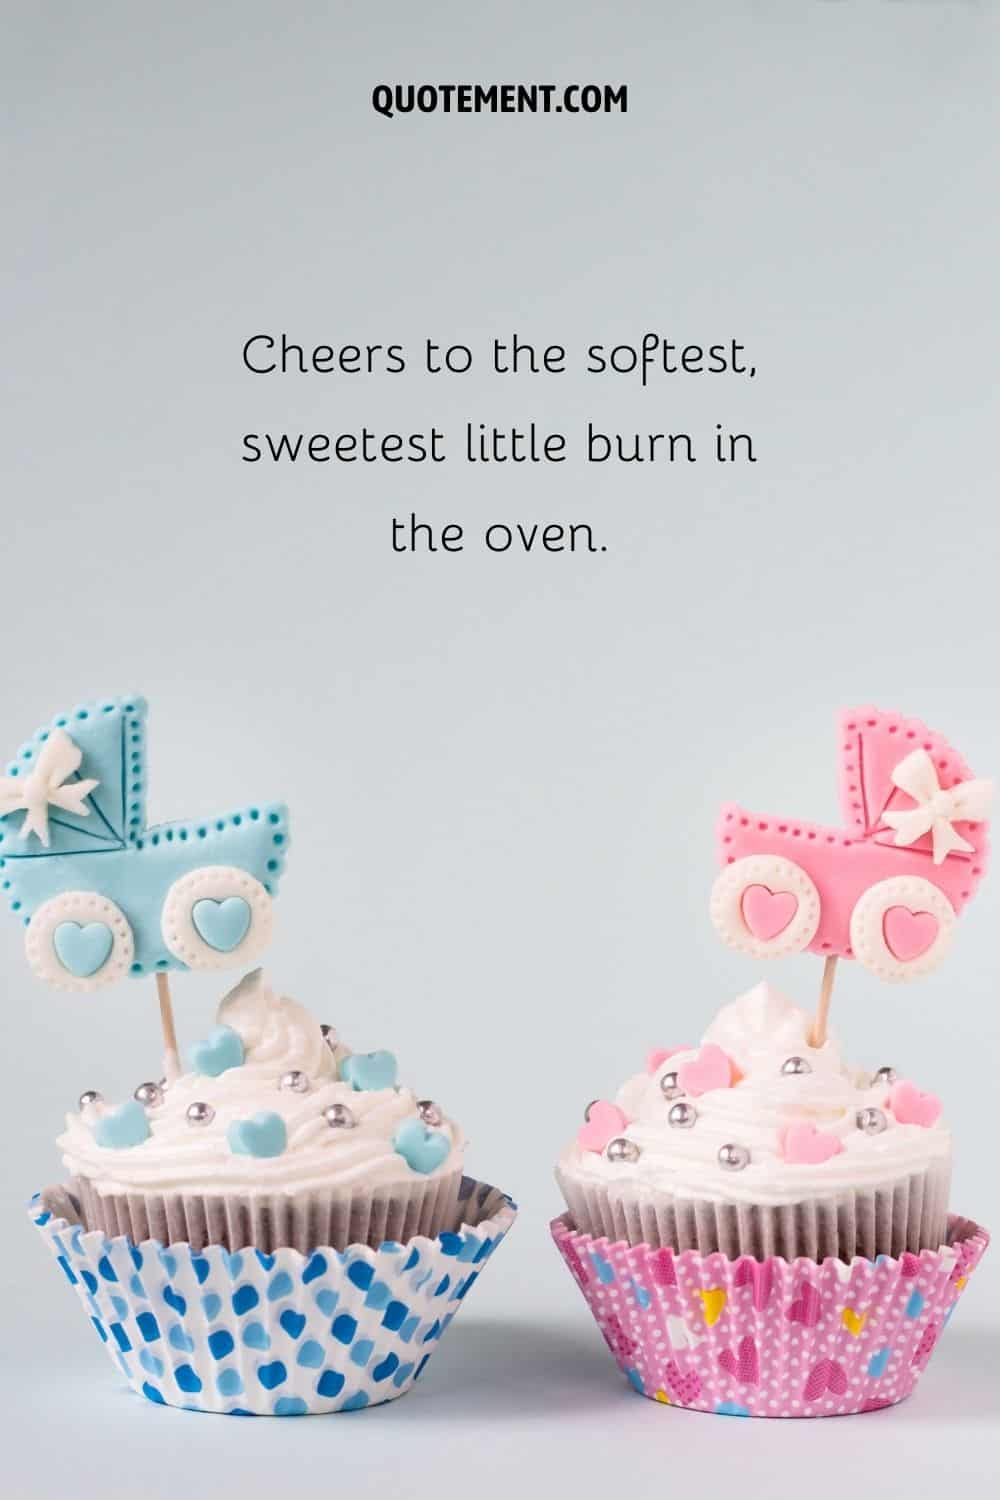 one cupcake with blue decorations and one with pink